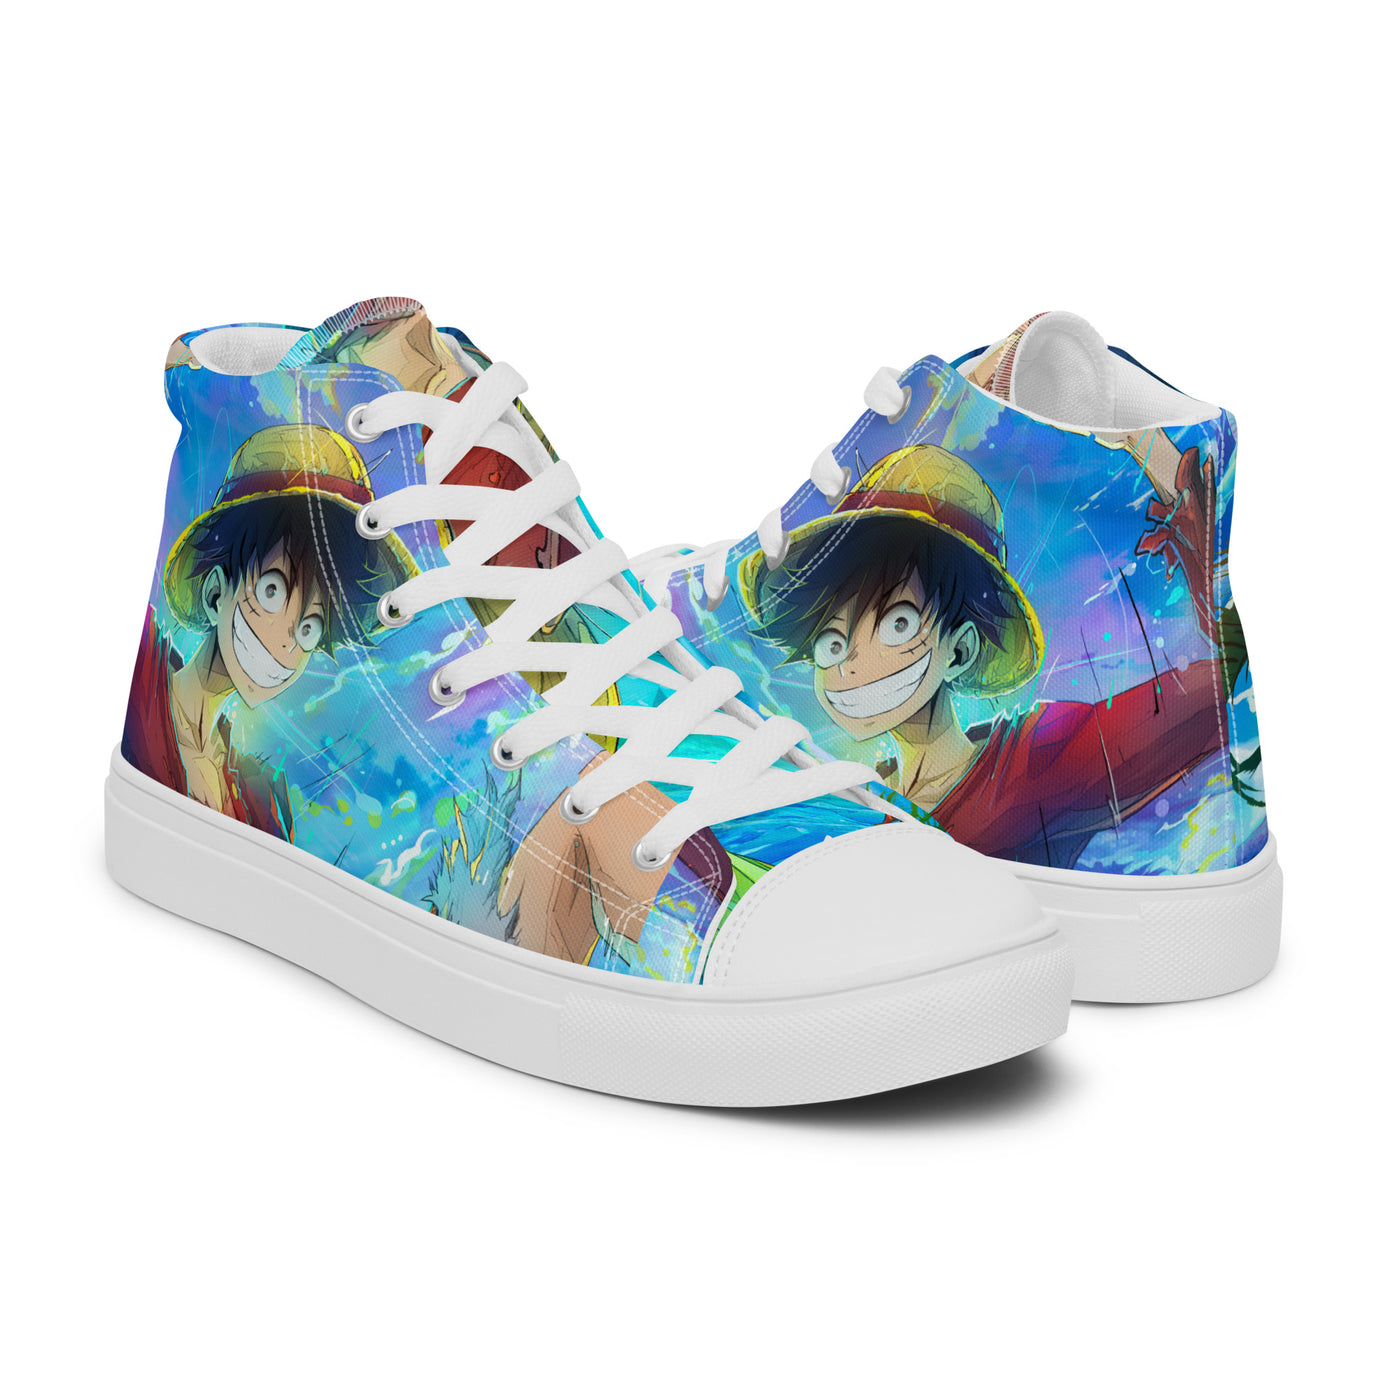 Luffy One Piece Women’s high top shoes